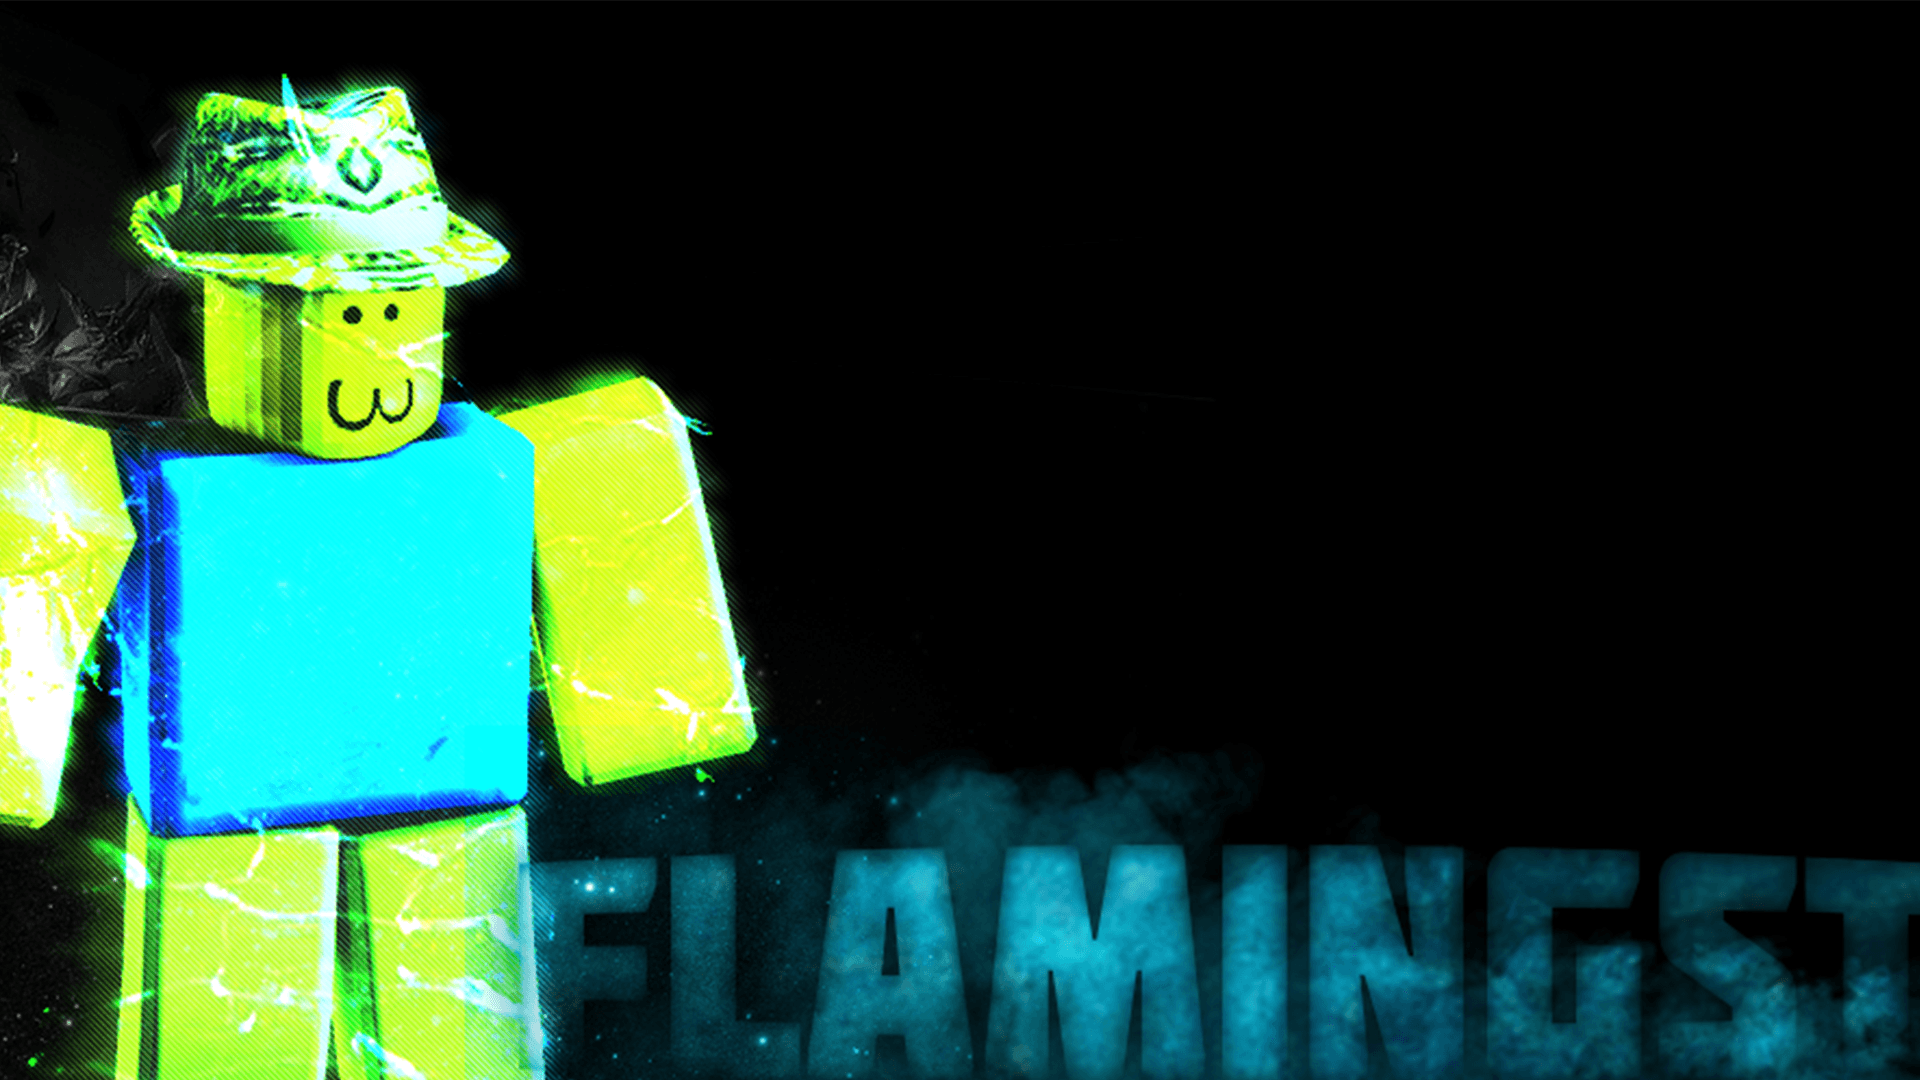 Fedora Noob. By Flamingst. [ROBLOX GFX]